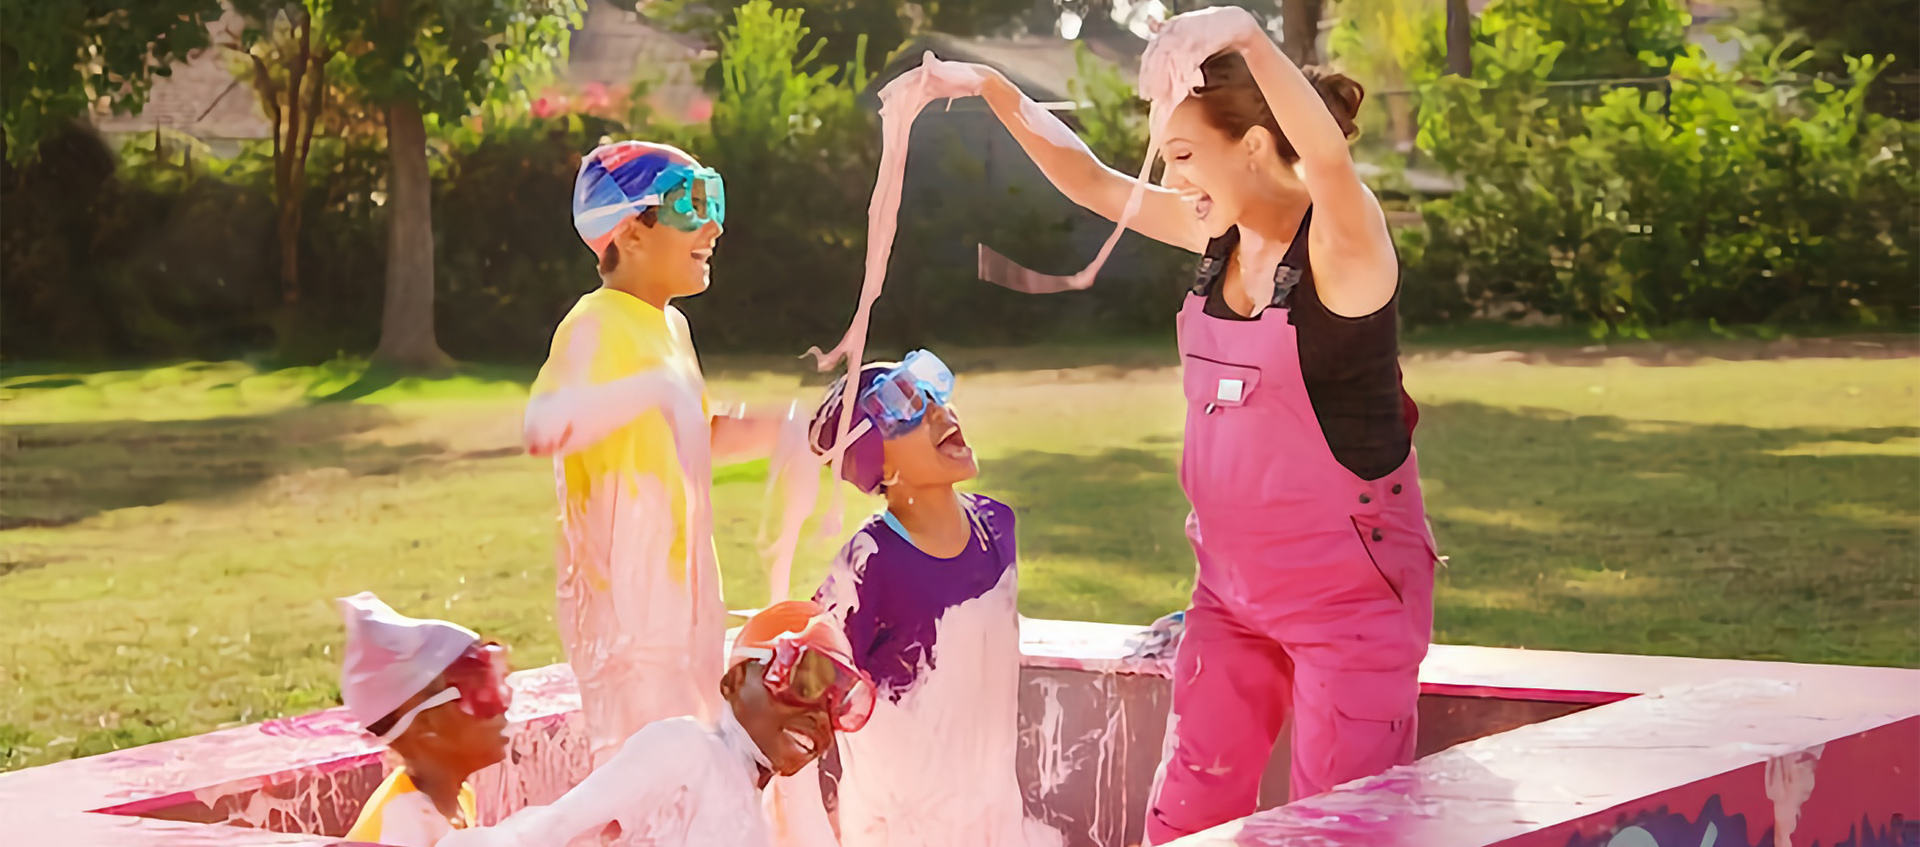 A woman in pink overalls plays with four children in a small outdoor pool filled with pink slime